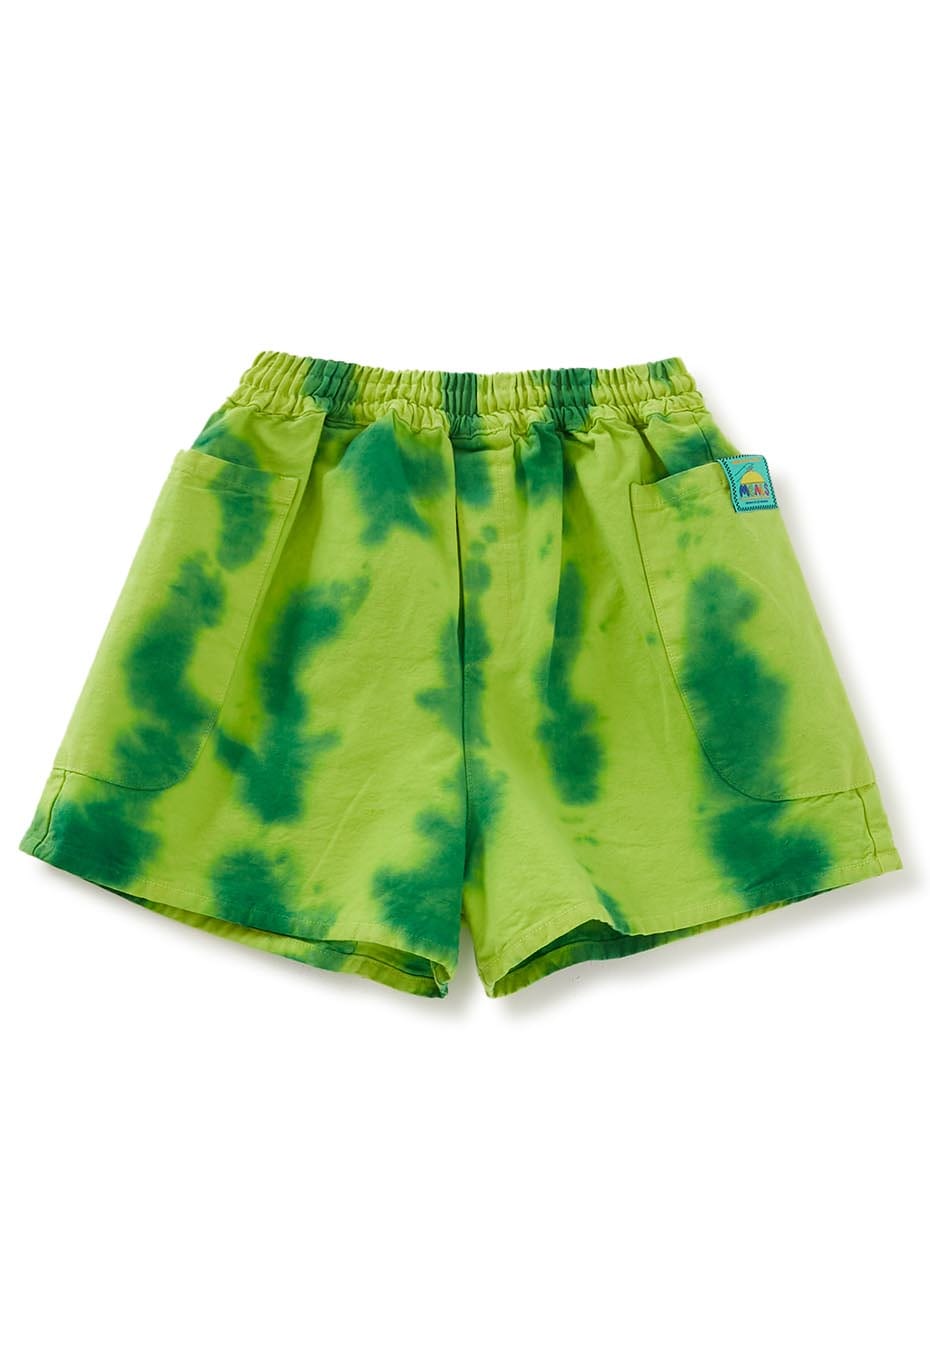 MEAL CLOTHING chef shorts